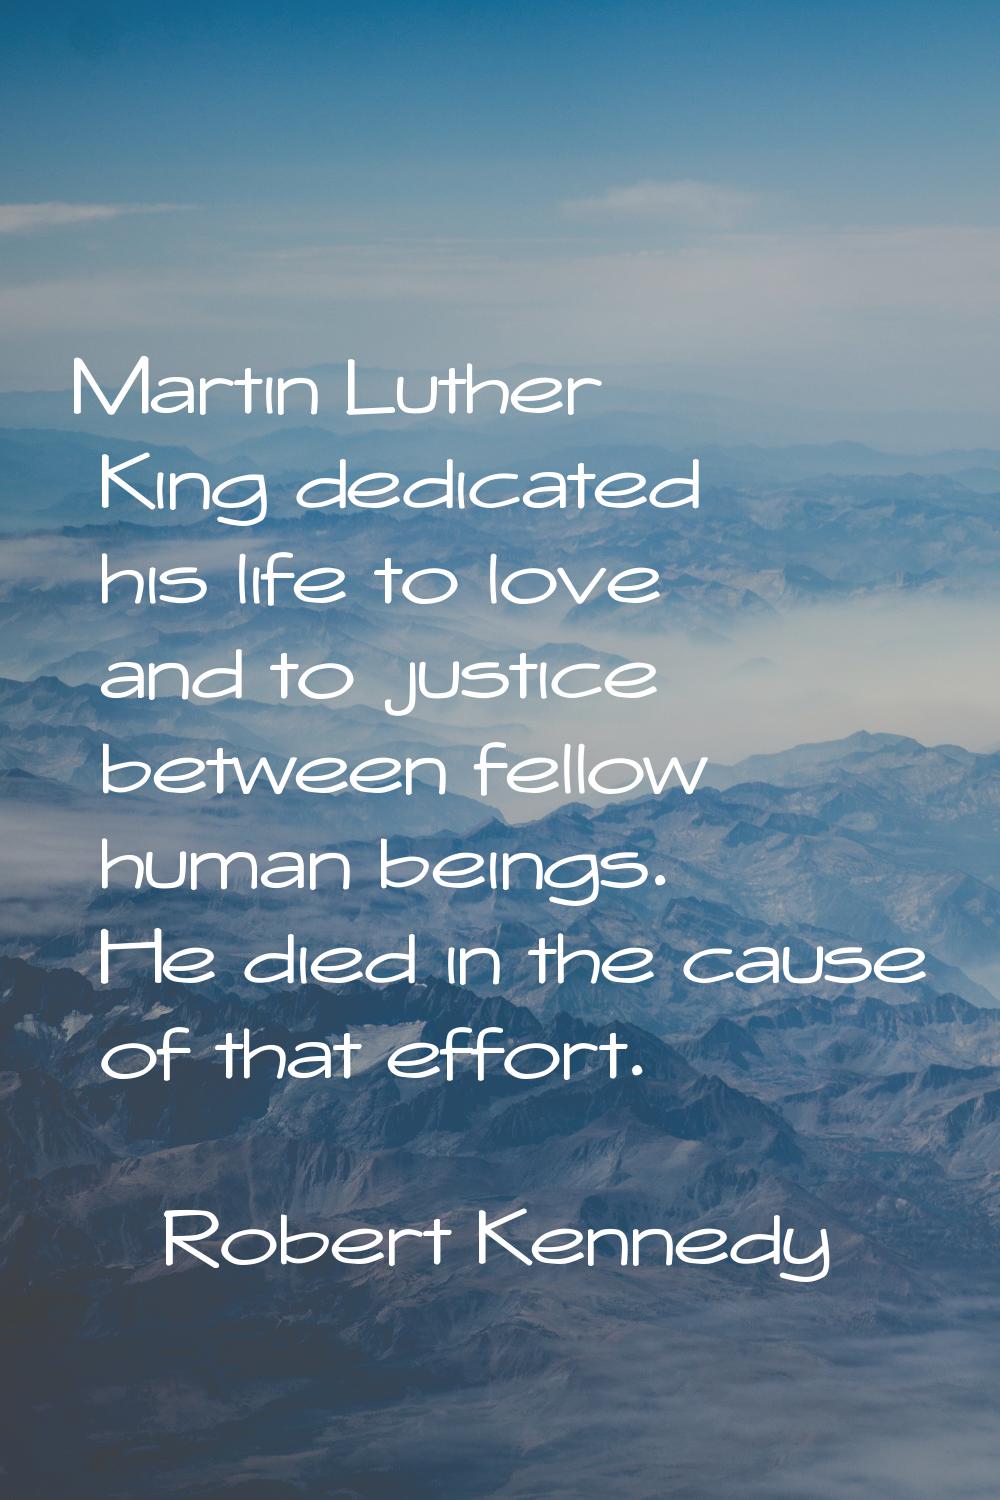 Martin Luther King dedicated his life to love and to justice between fellow human beings. He died i